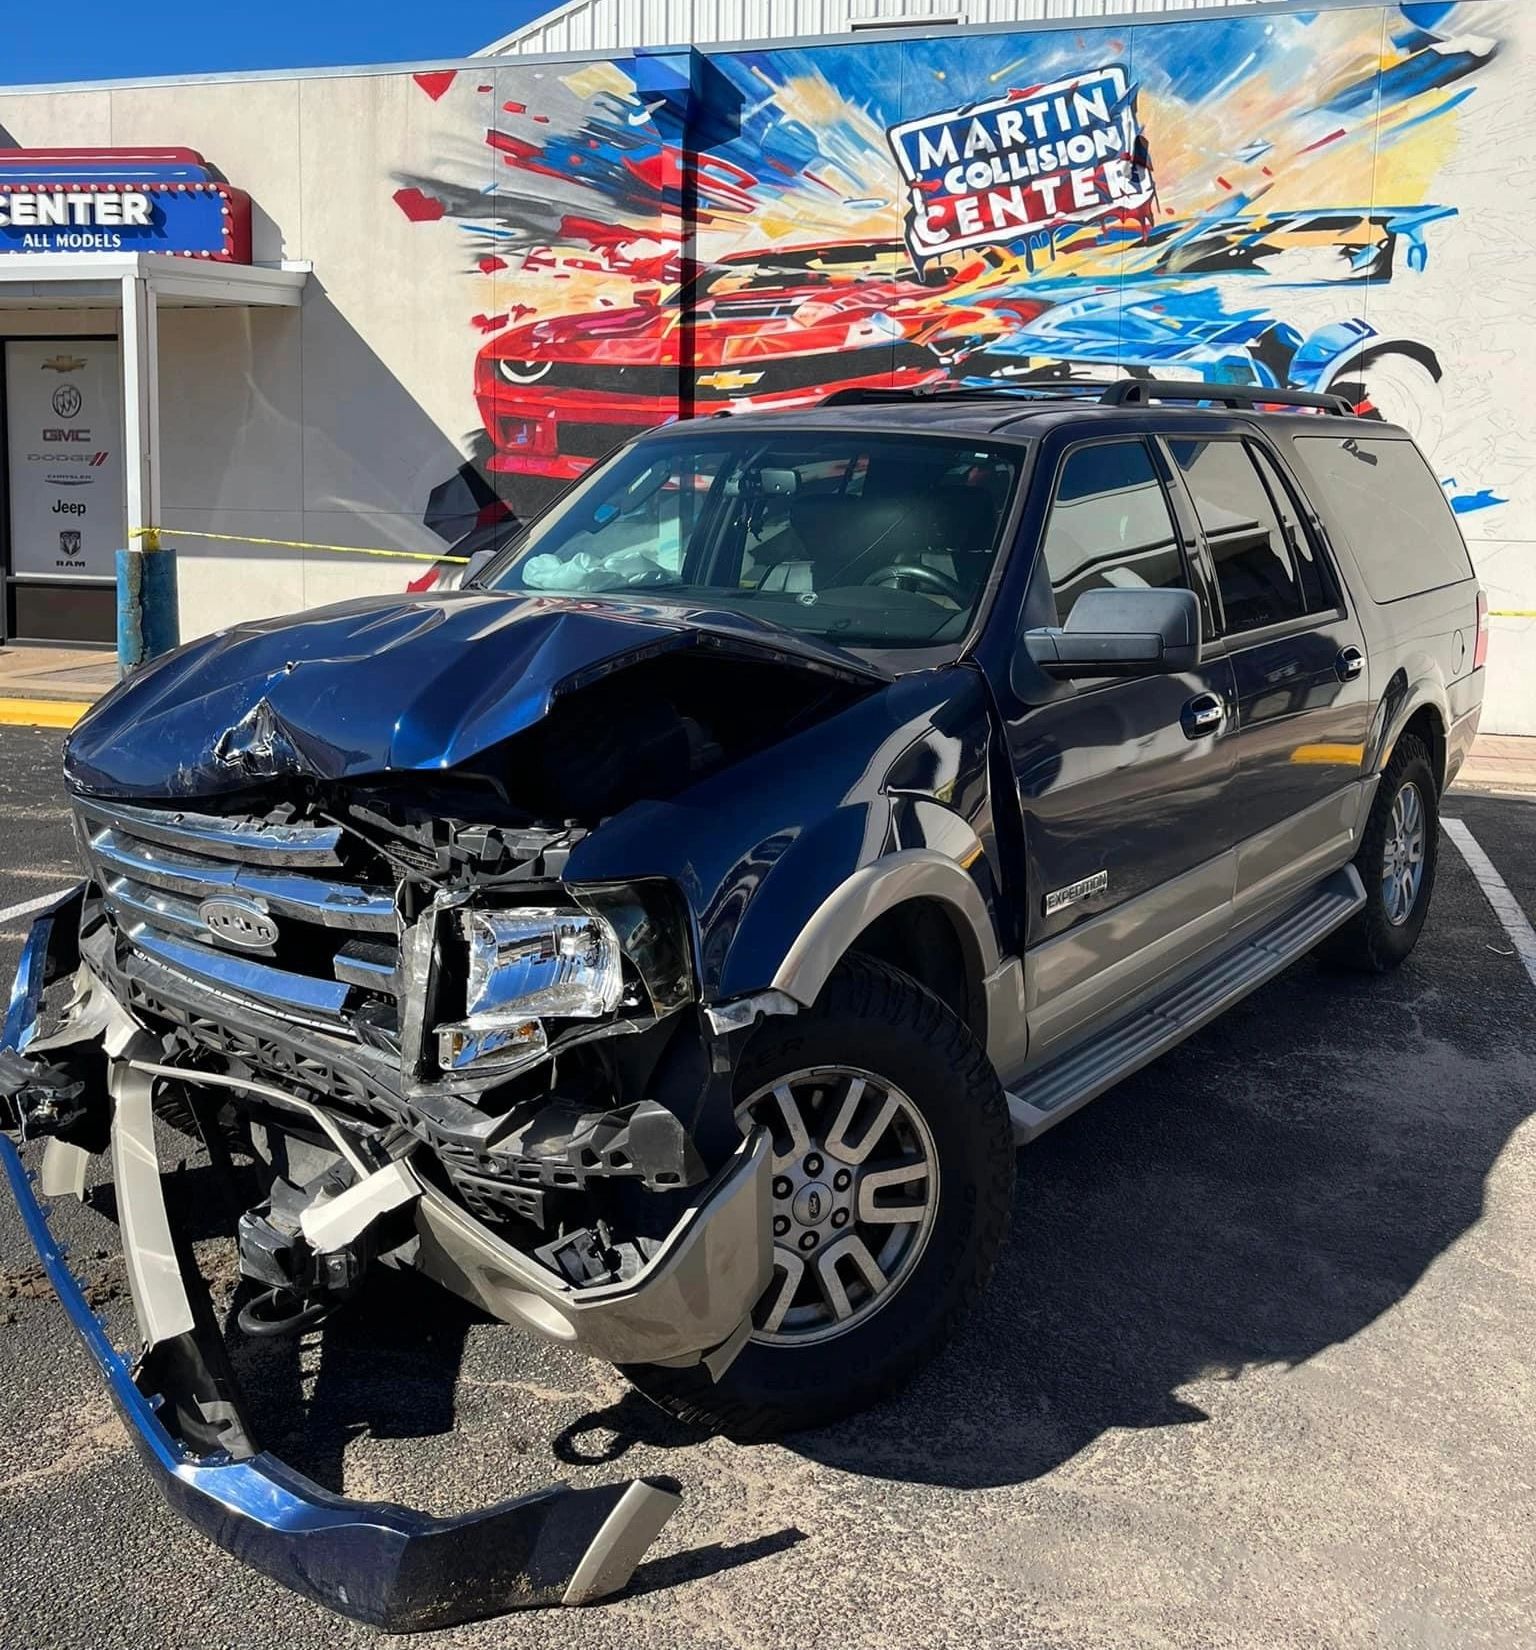 Accident happened in Cleveland, TX. Towed in for bodyshop repairs. The 